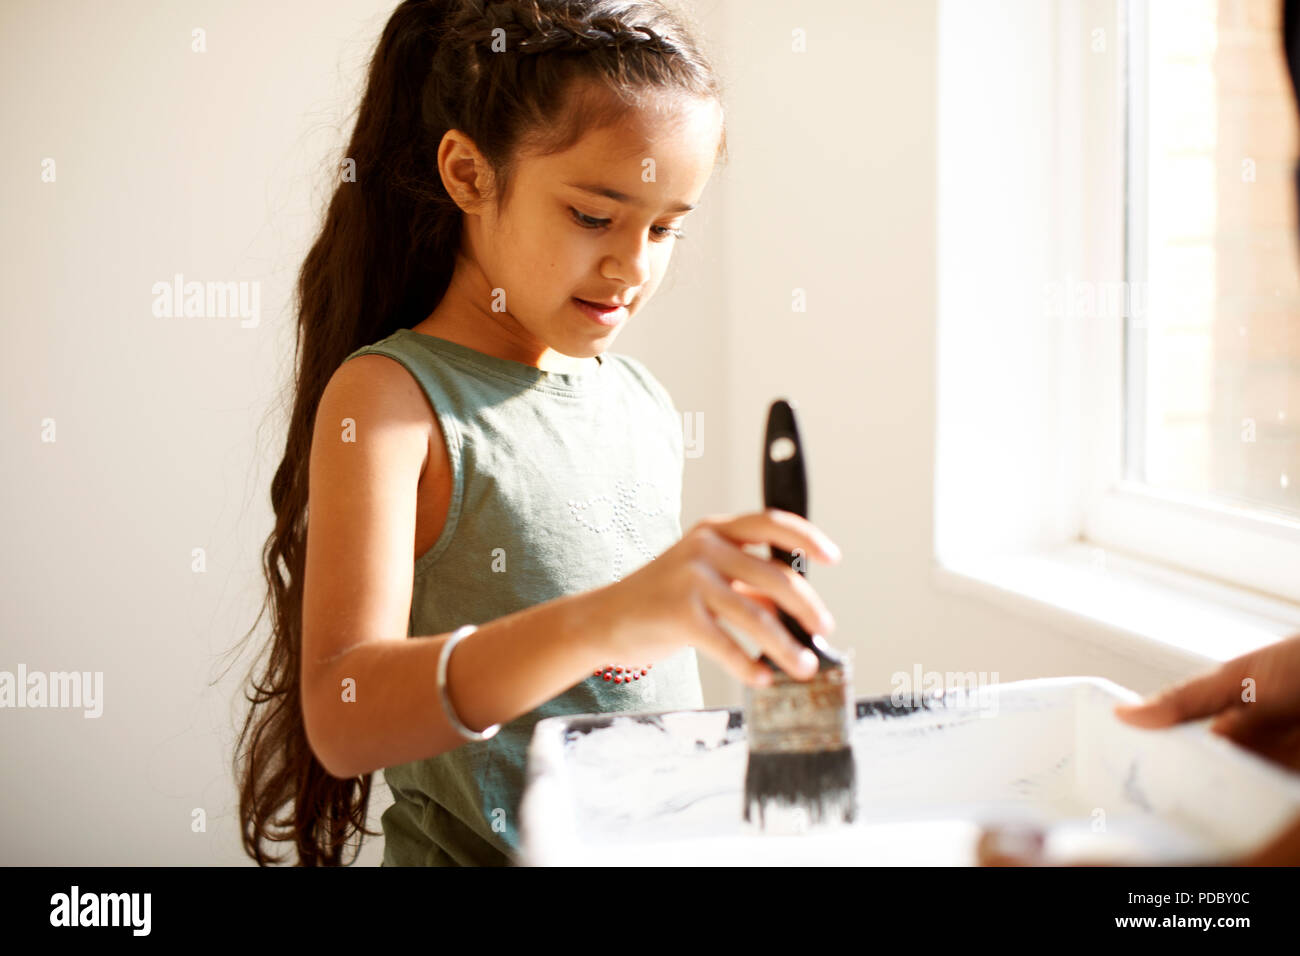 Girl painting, dipping paintbrush in tray Stock Photo